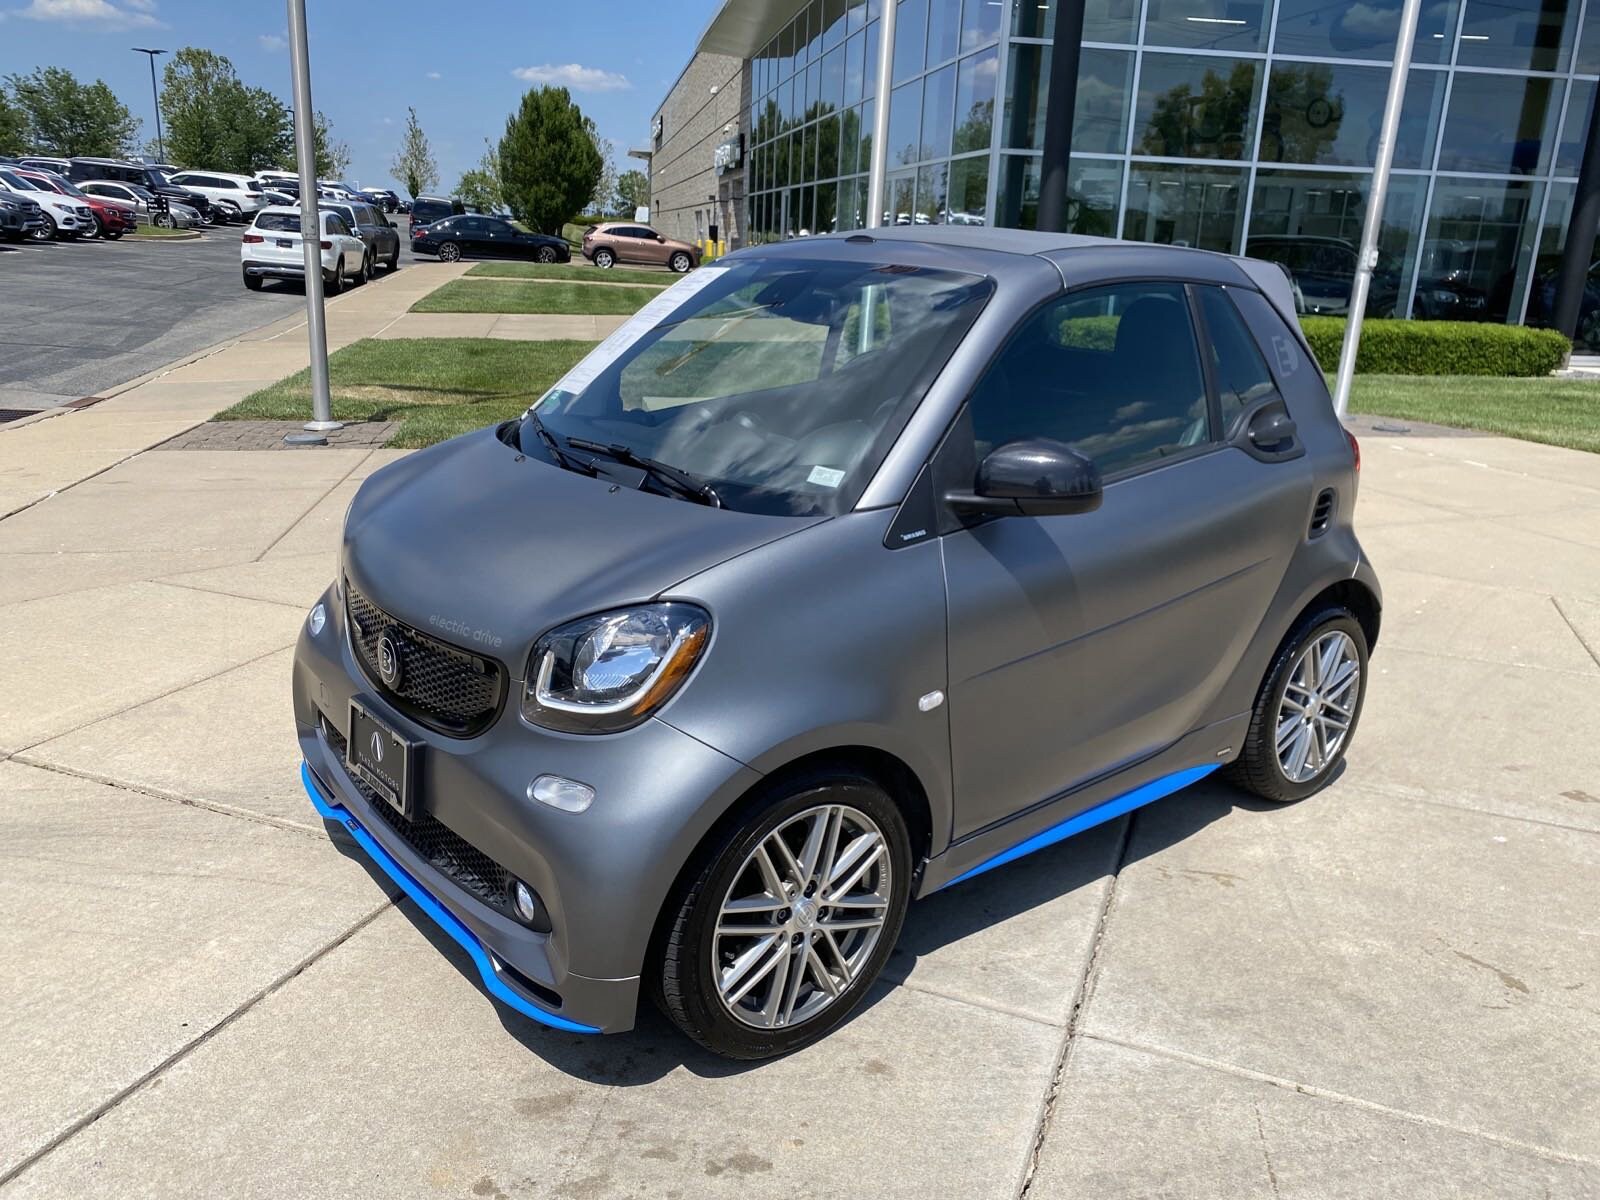 Used 2018 smart fortwo passion with VIN WMEFK9BA2JK259496 for sale in O Fallon, MO